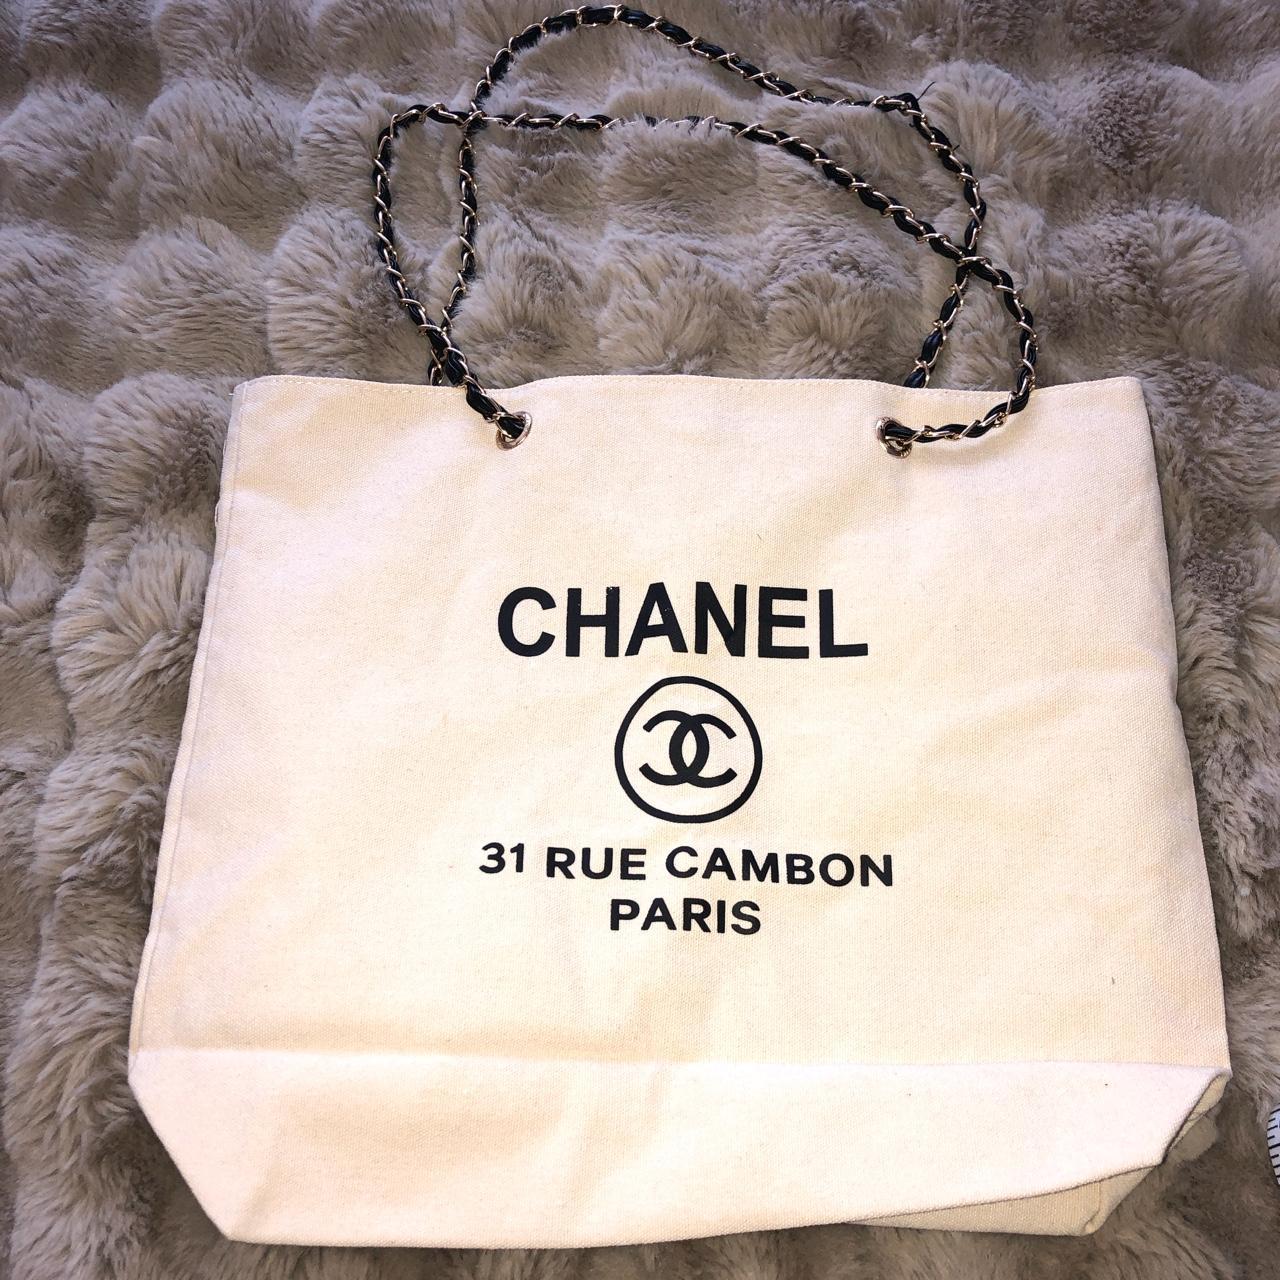 Chanel gifts bag . Size 5.5x4.4x2. Included - Depop